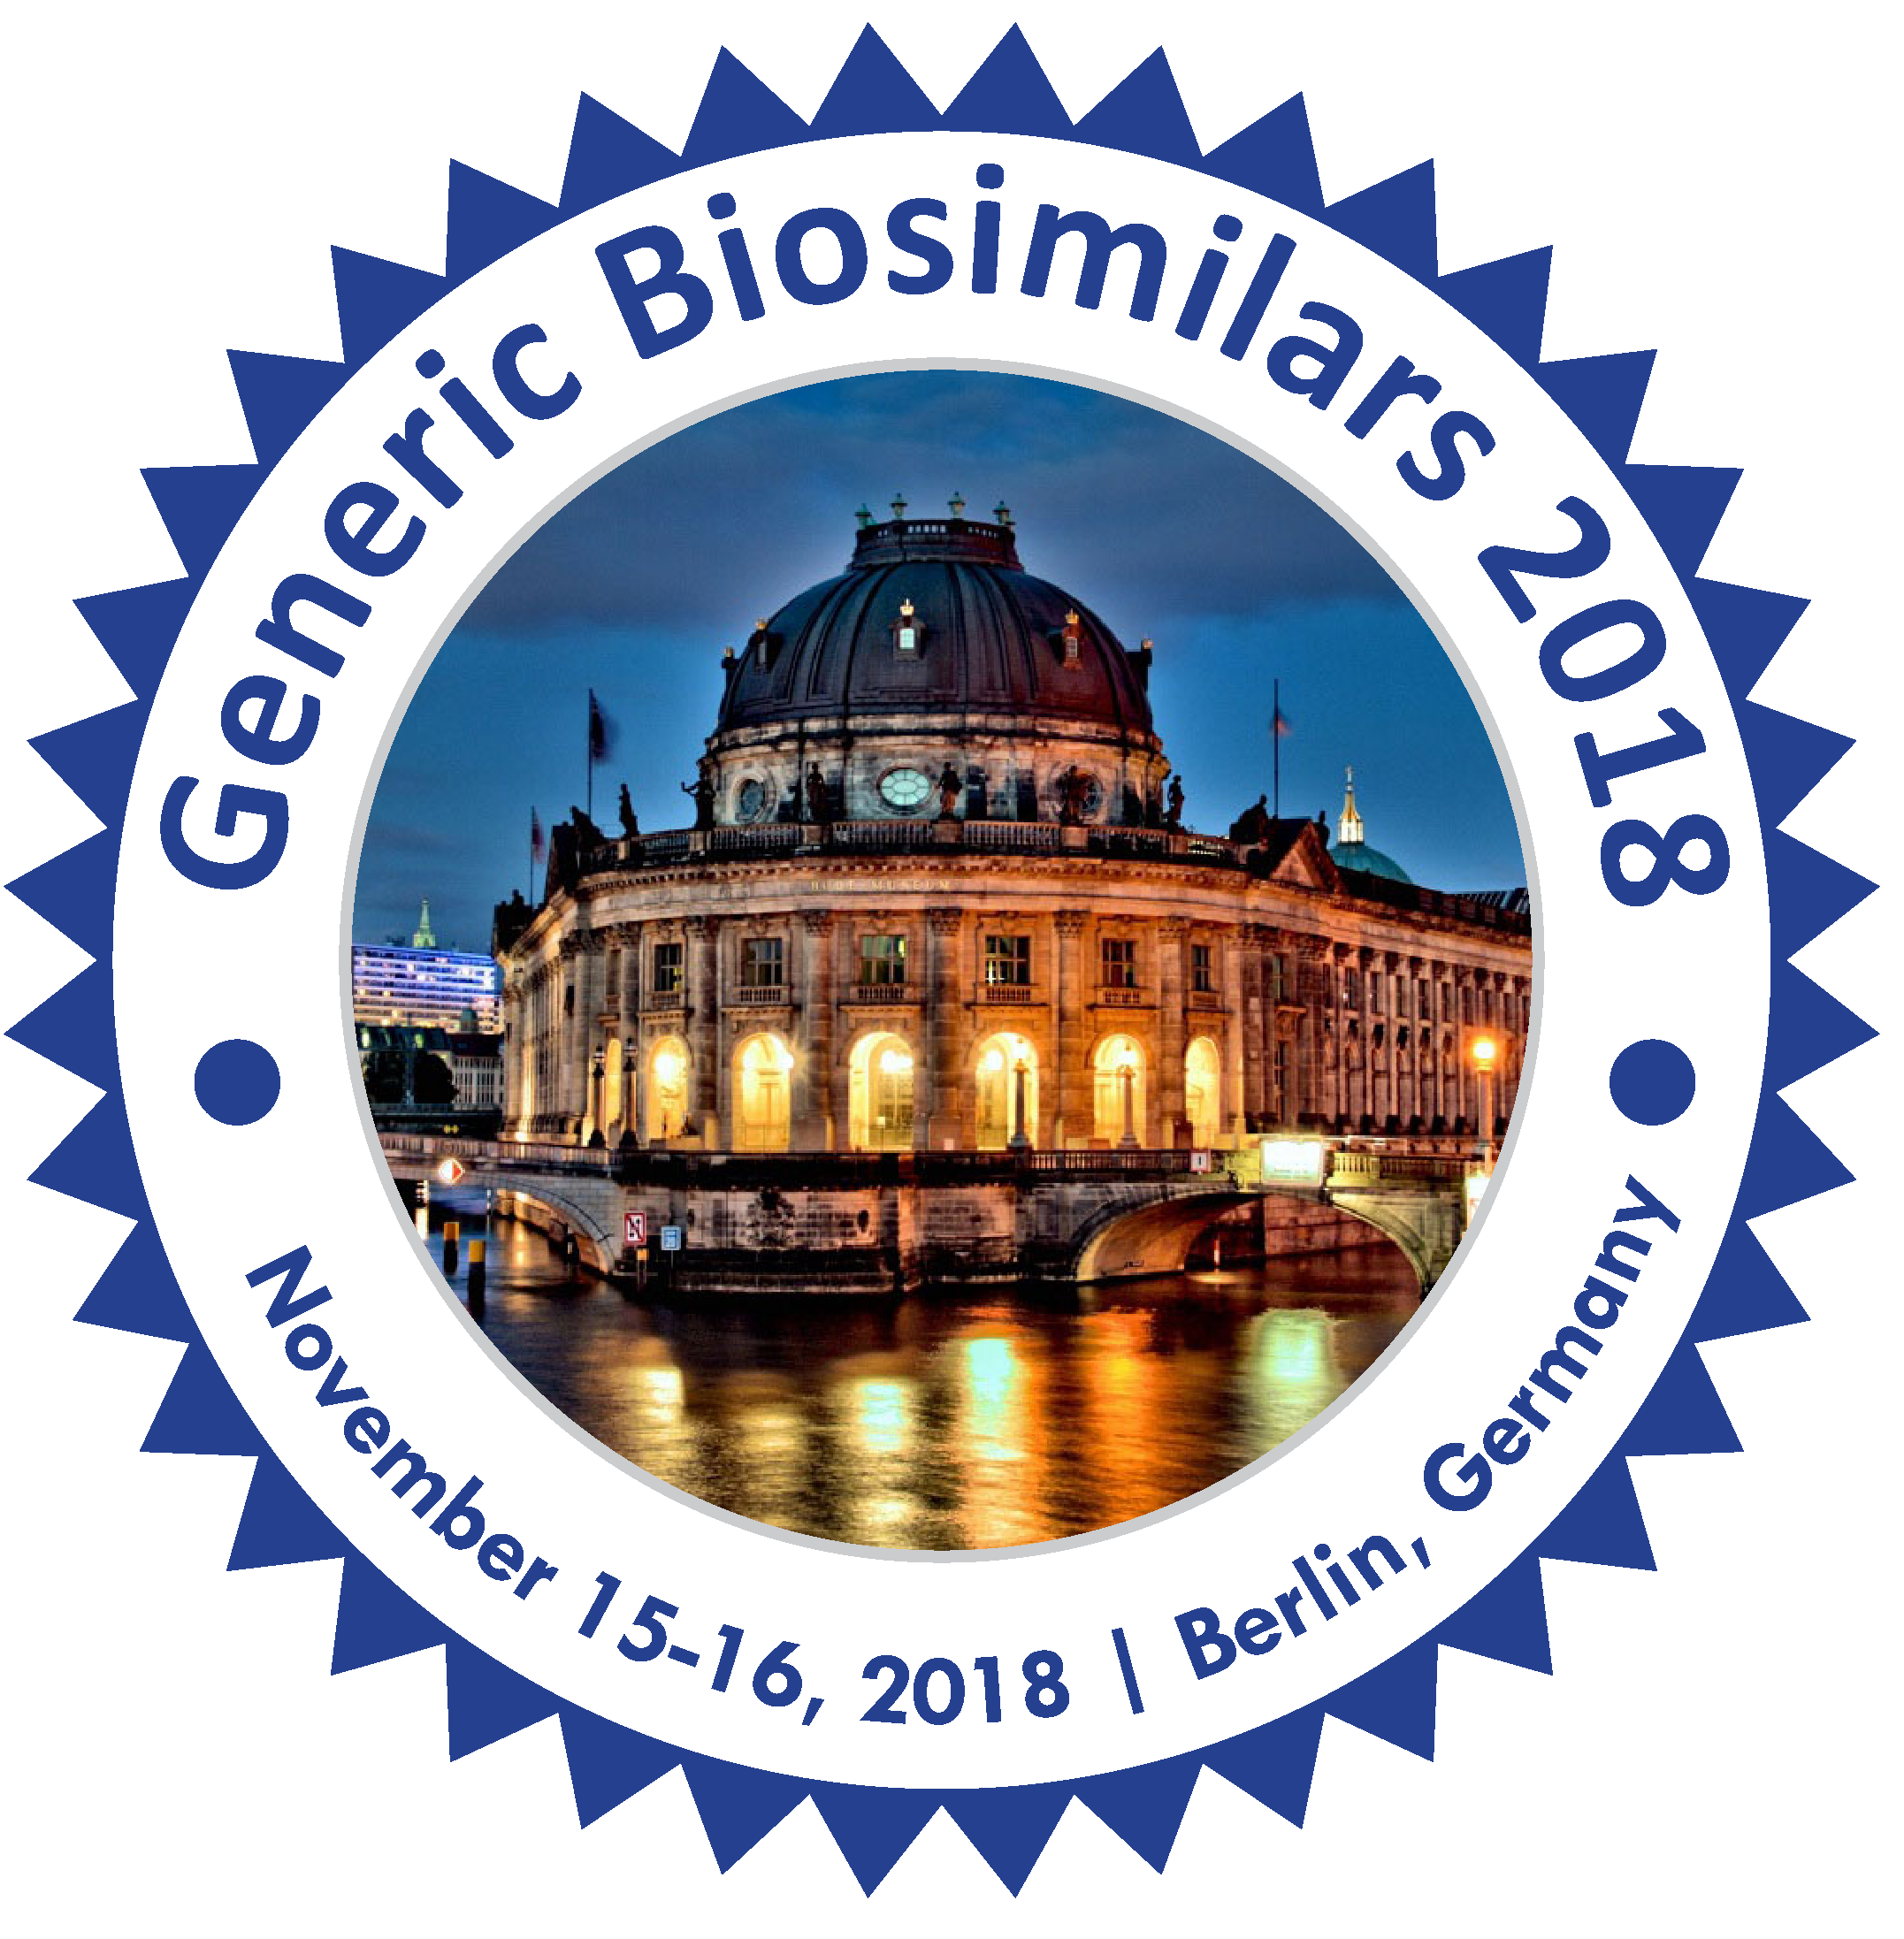 14th International Conference on Generic Drugs and Biosimilars